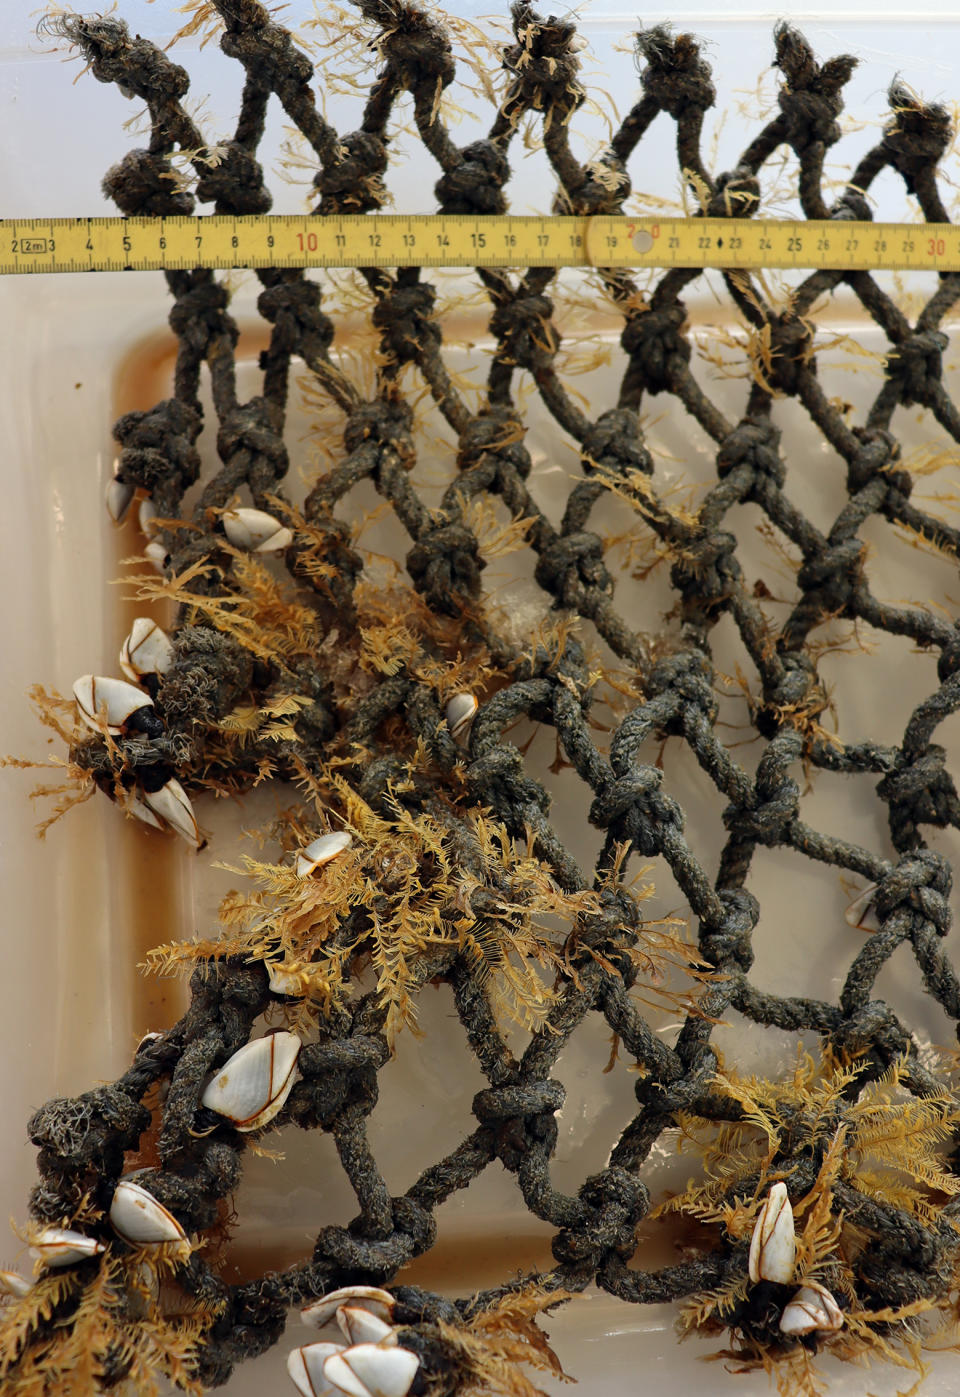 Image: Coastal podded hydroid Aglaophenia pluma and gooseneck barnacle Lepas from the open ocean on a colonized net. (Smithsonian Institution)